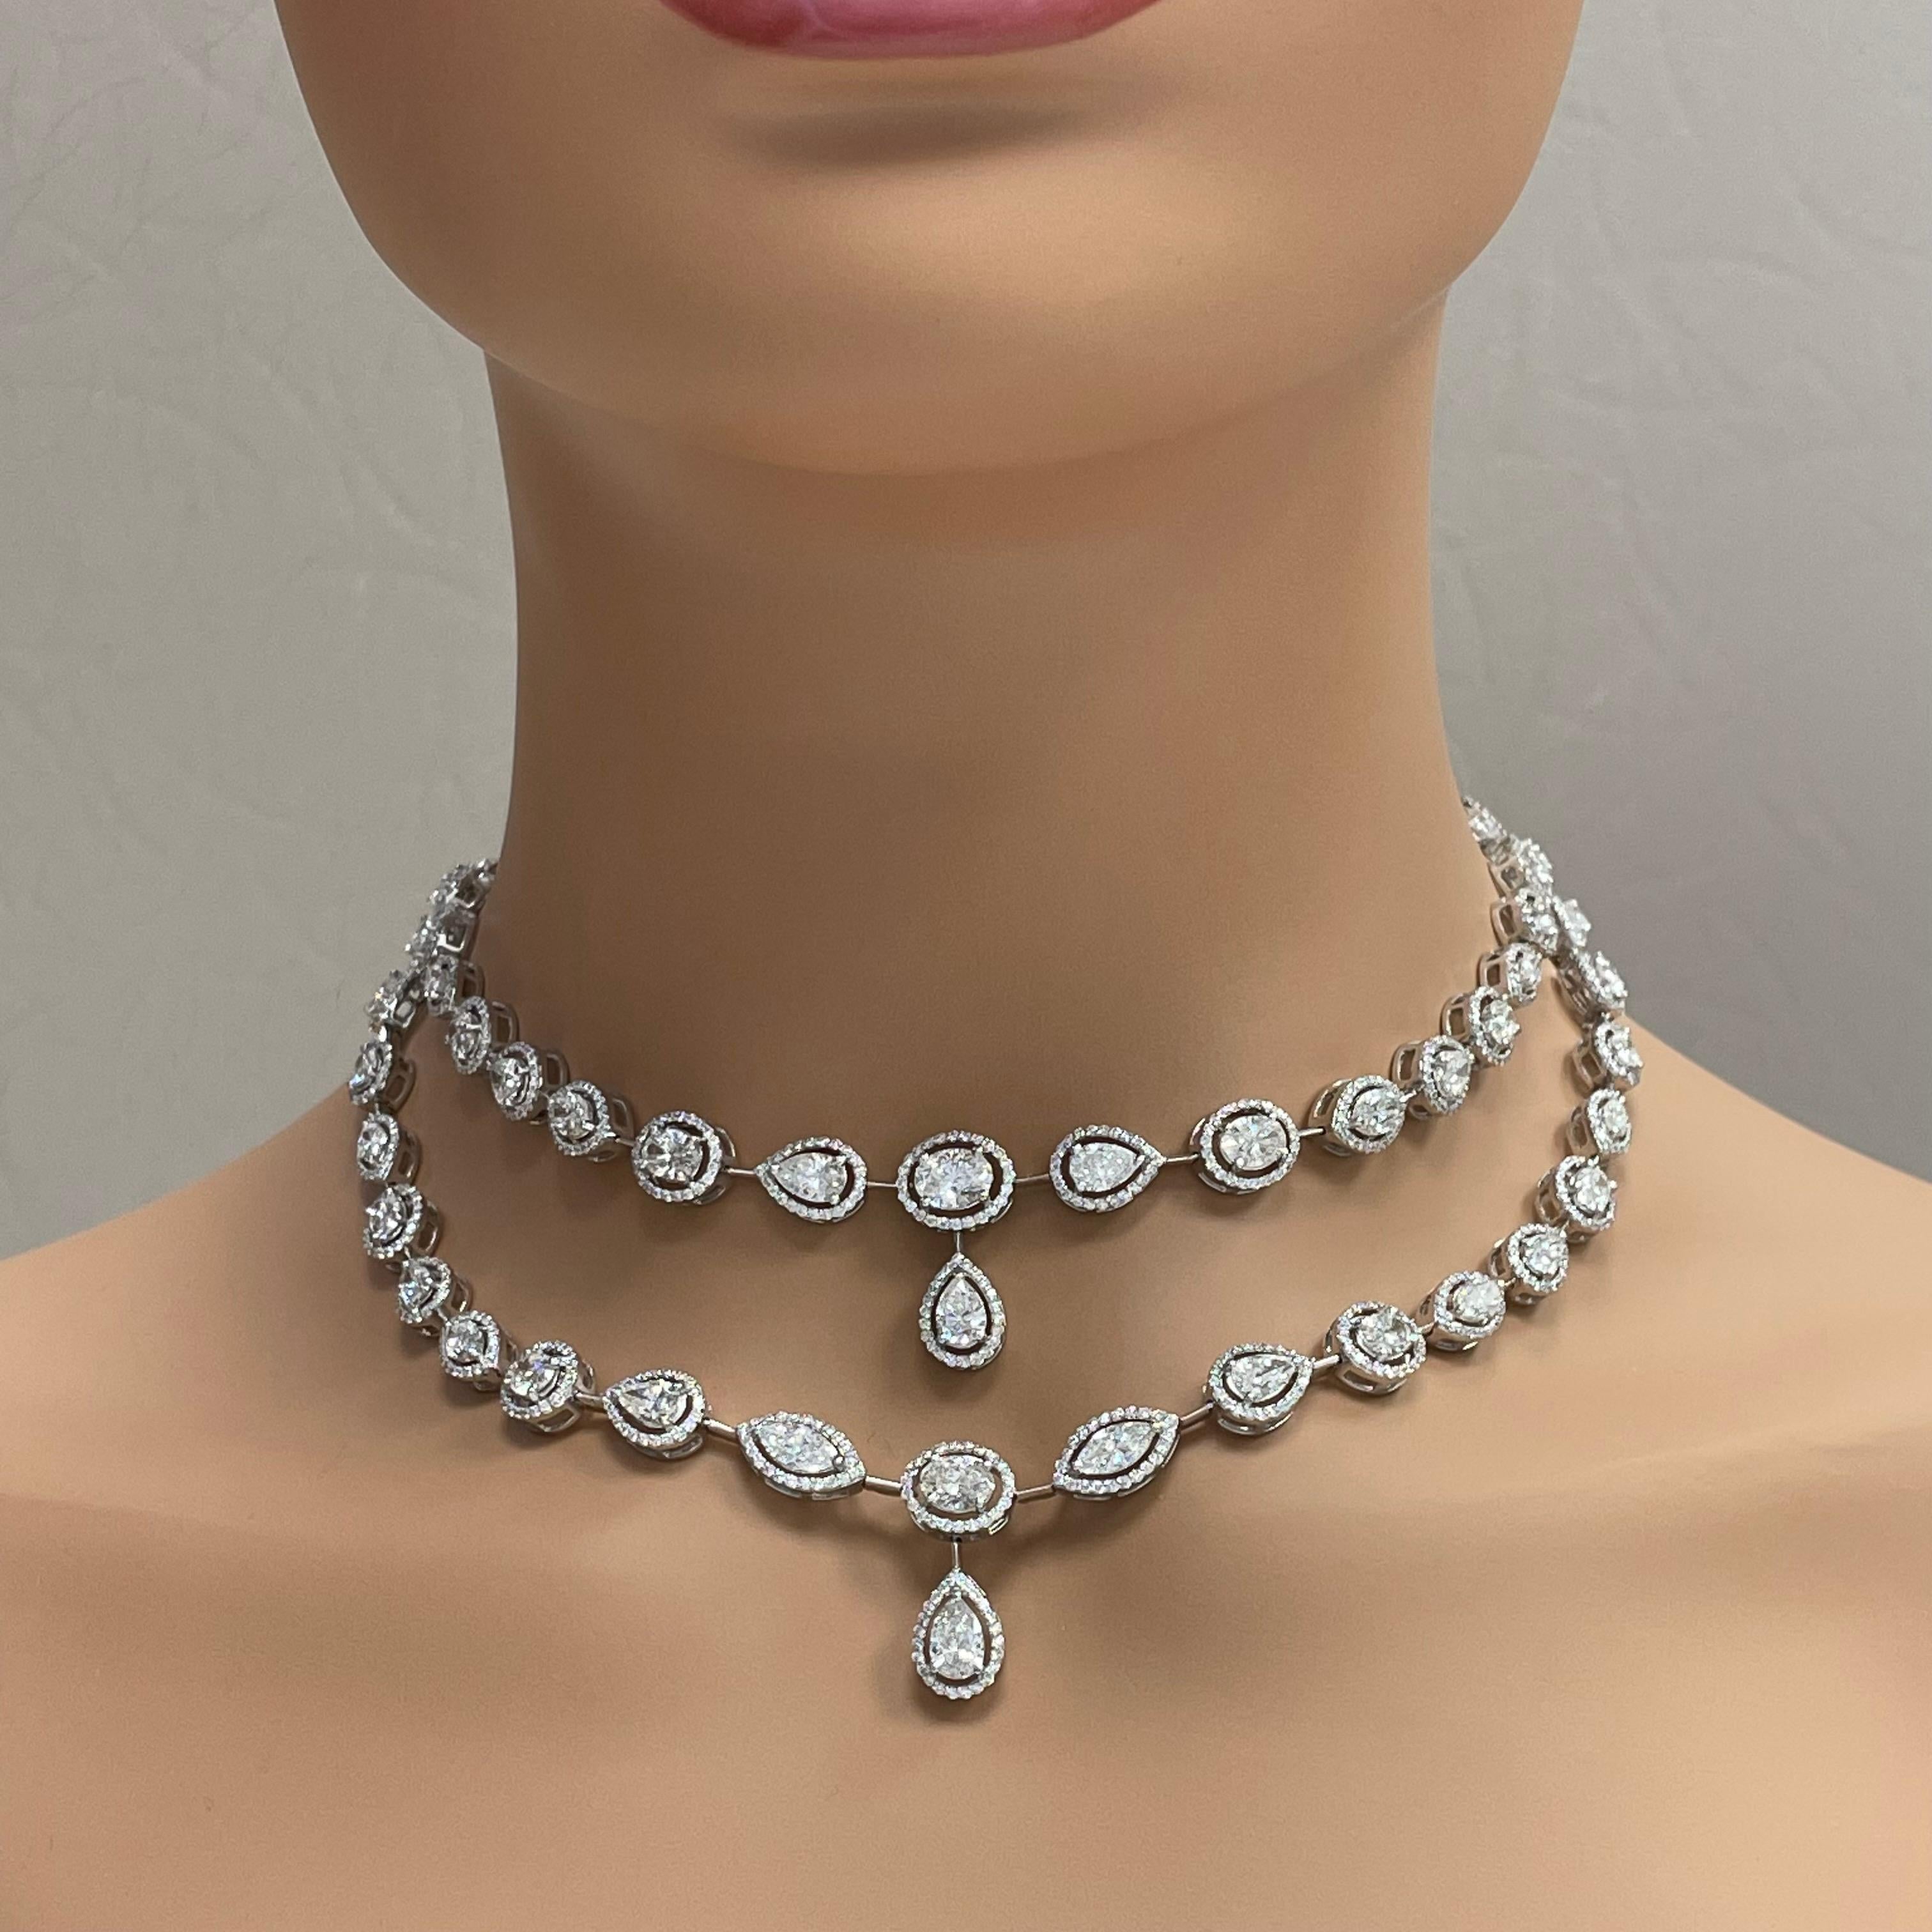 The Tara Necklace features a elegant timeless design that highlights each diamond and impresses with its simple yet stated style. 

Diamonds Shapes: Pear Shape, Oval, Marquise & Round 
Total Diamonds Weight: 24.74 ct 
Diamonds Color: F - H 
Diamonds